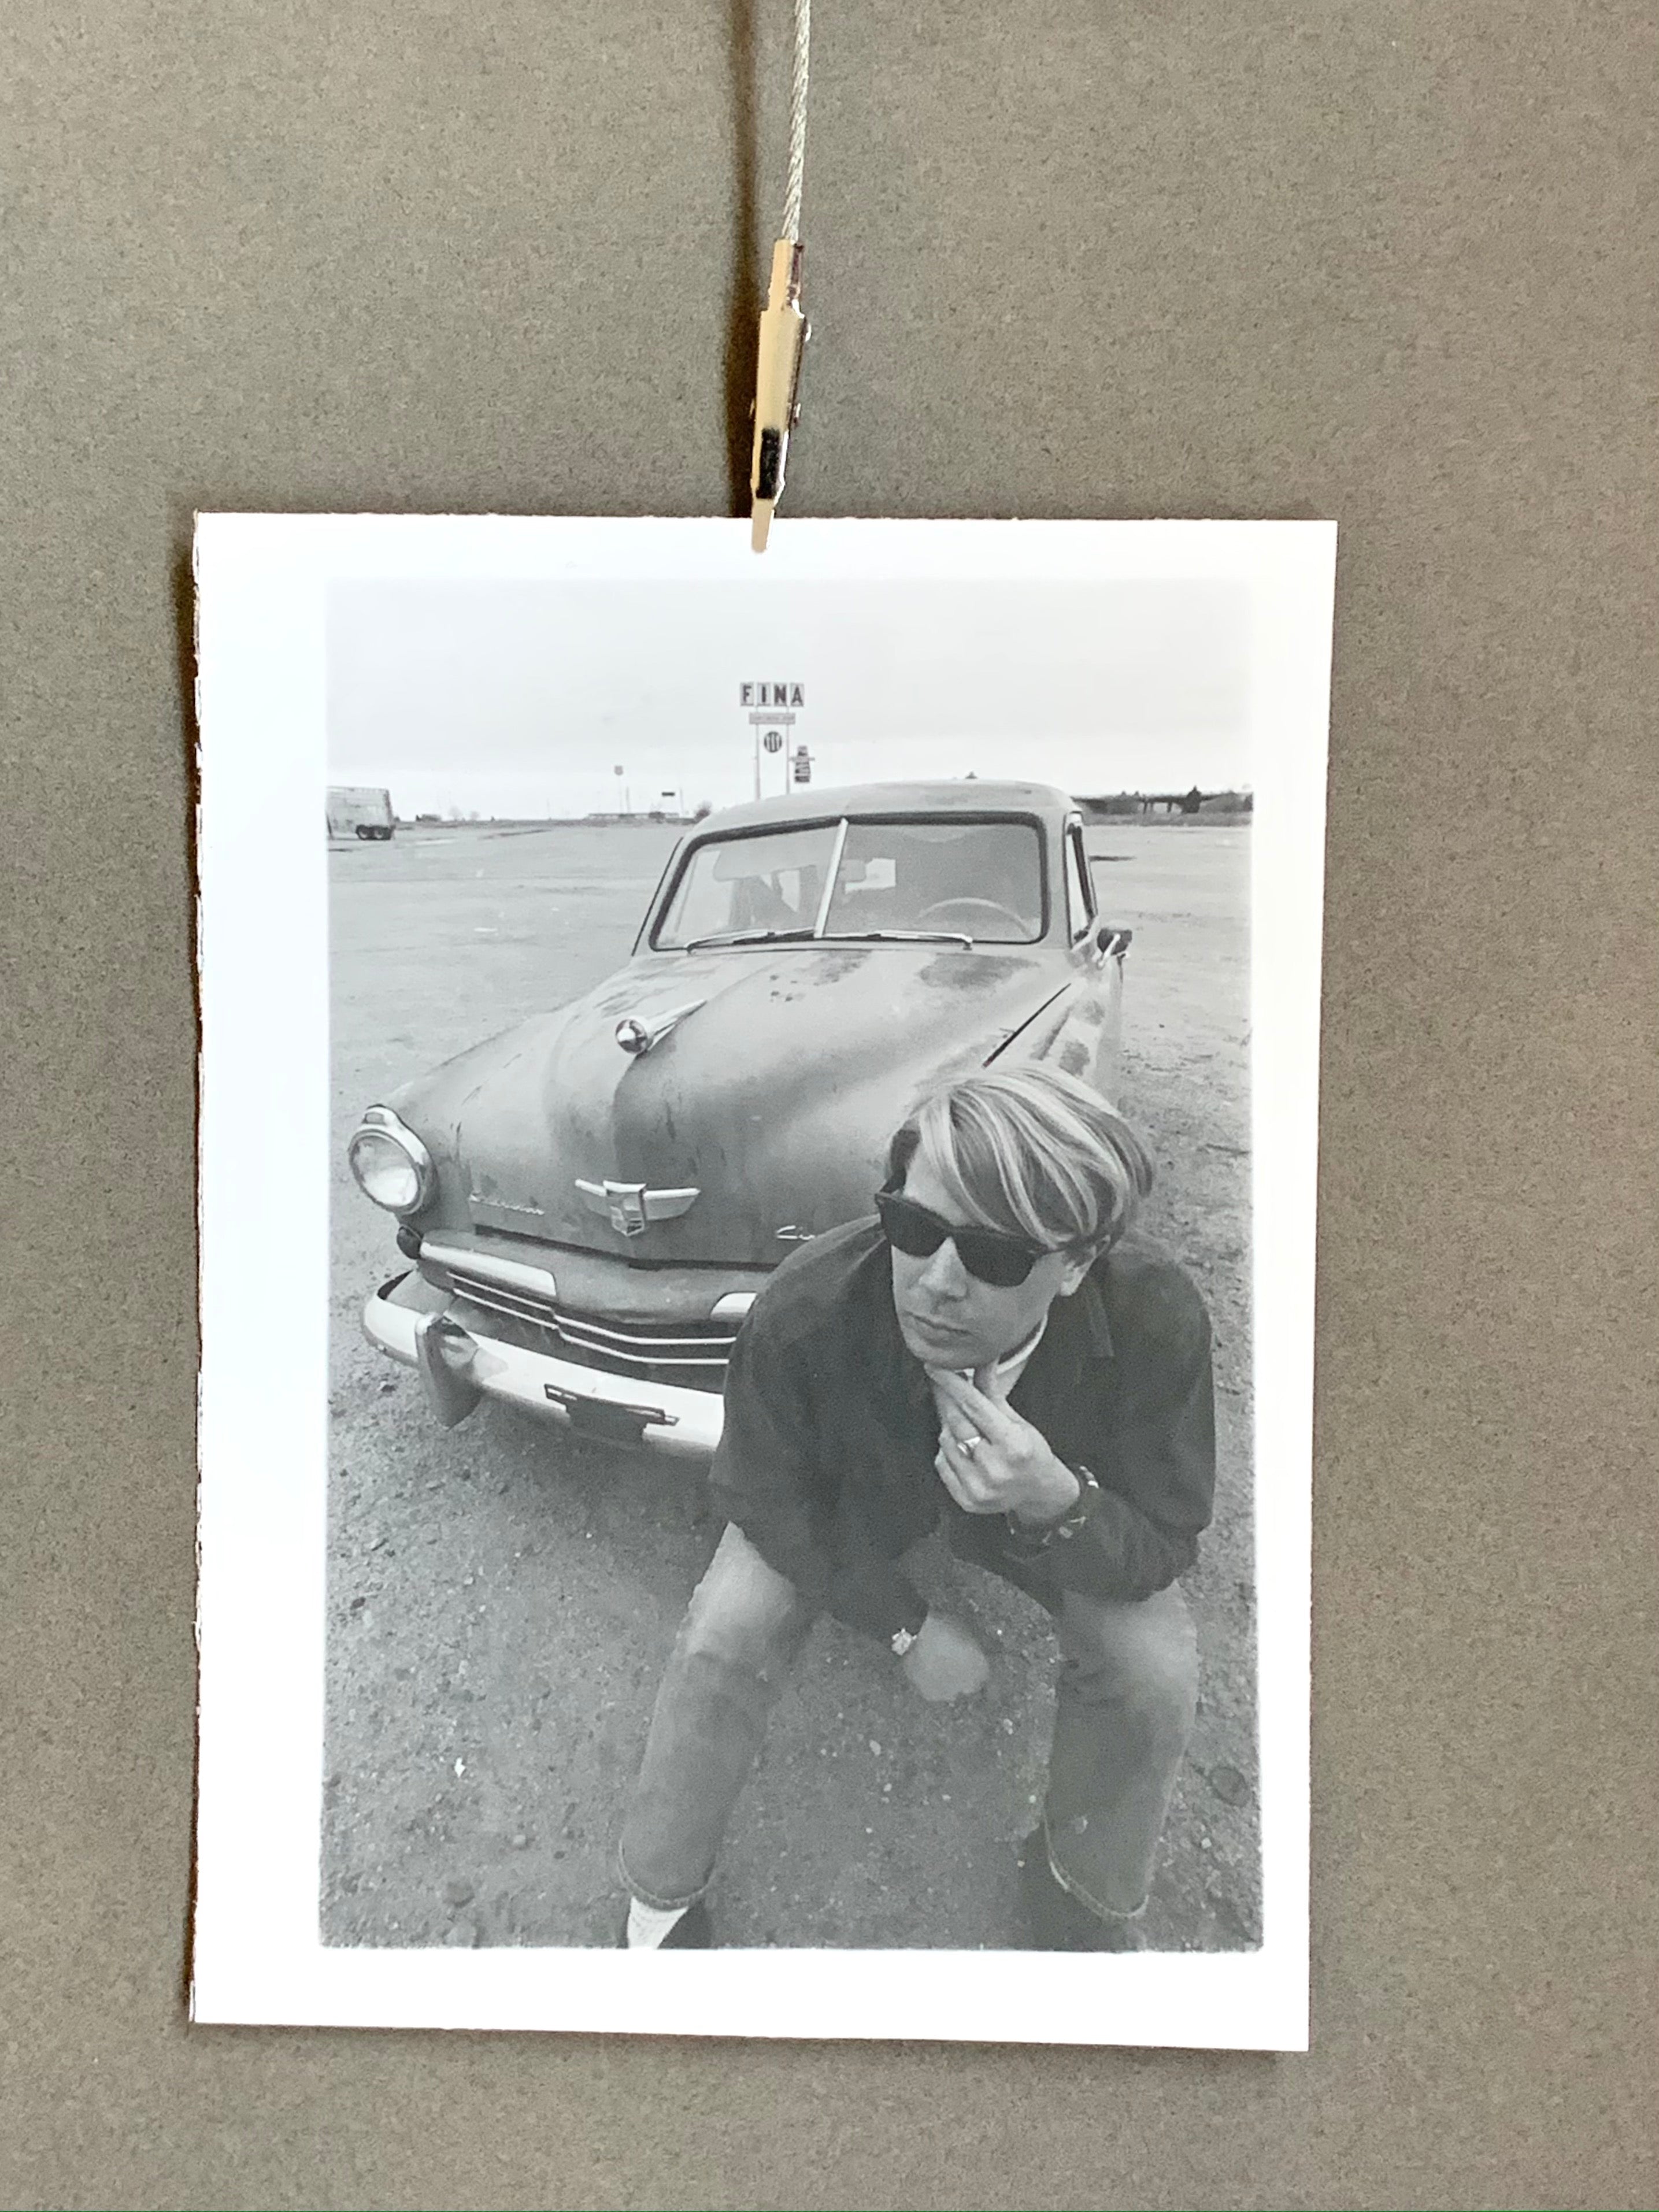 Black and White Photograph of Man w/ Vintage Classic Car; Fina Station Sign